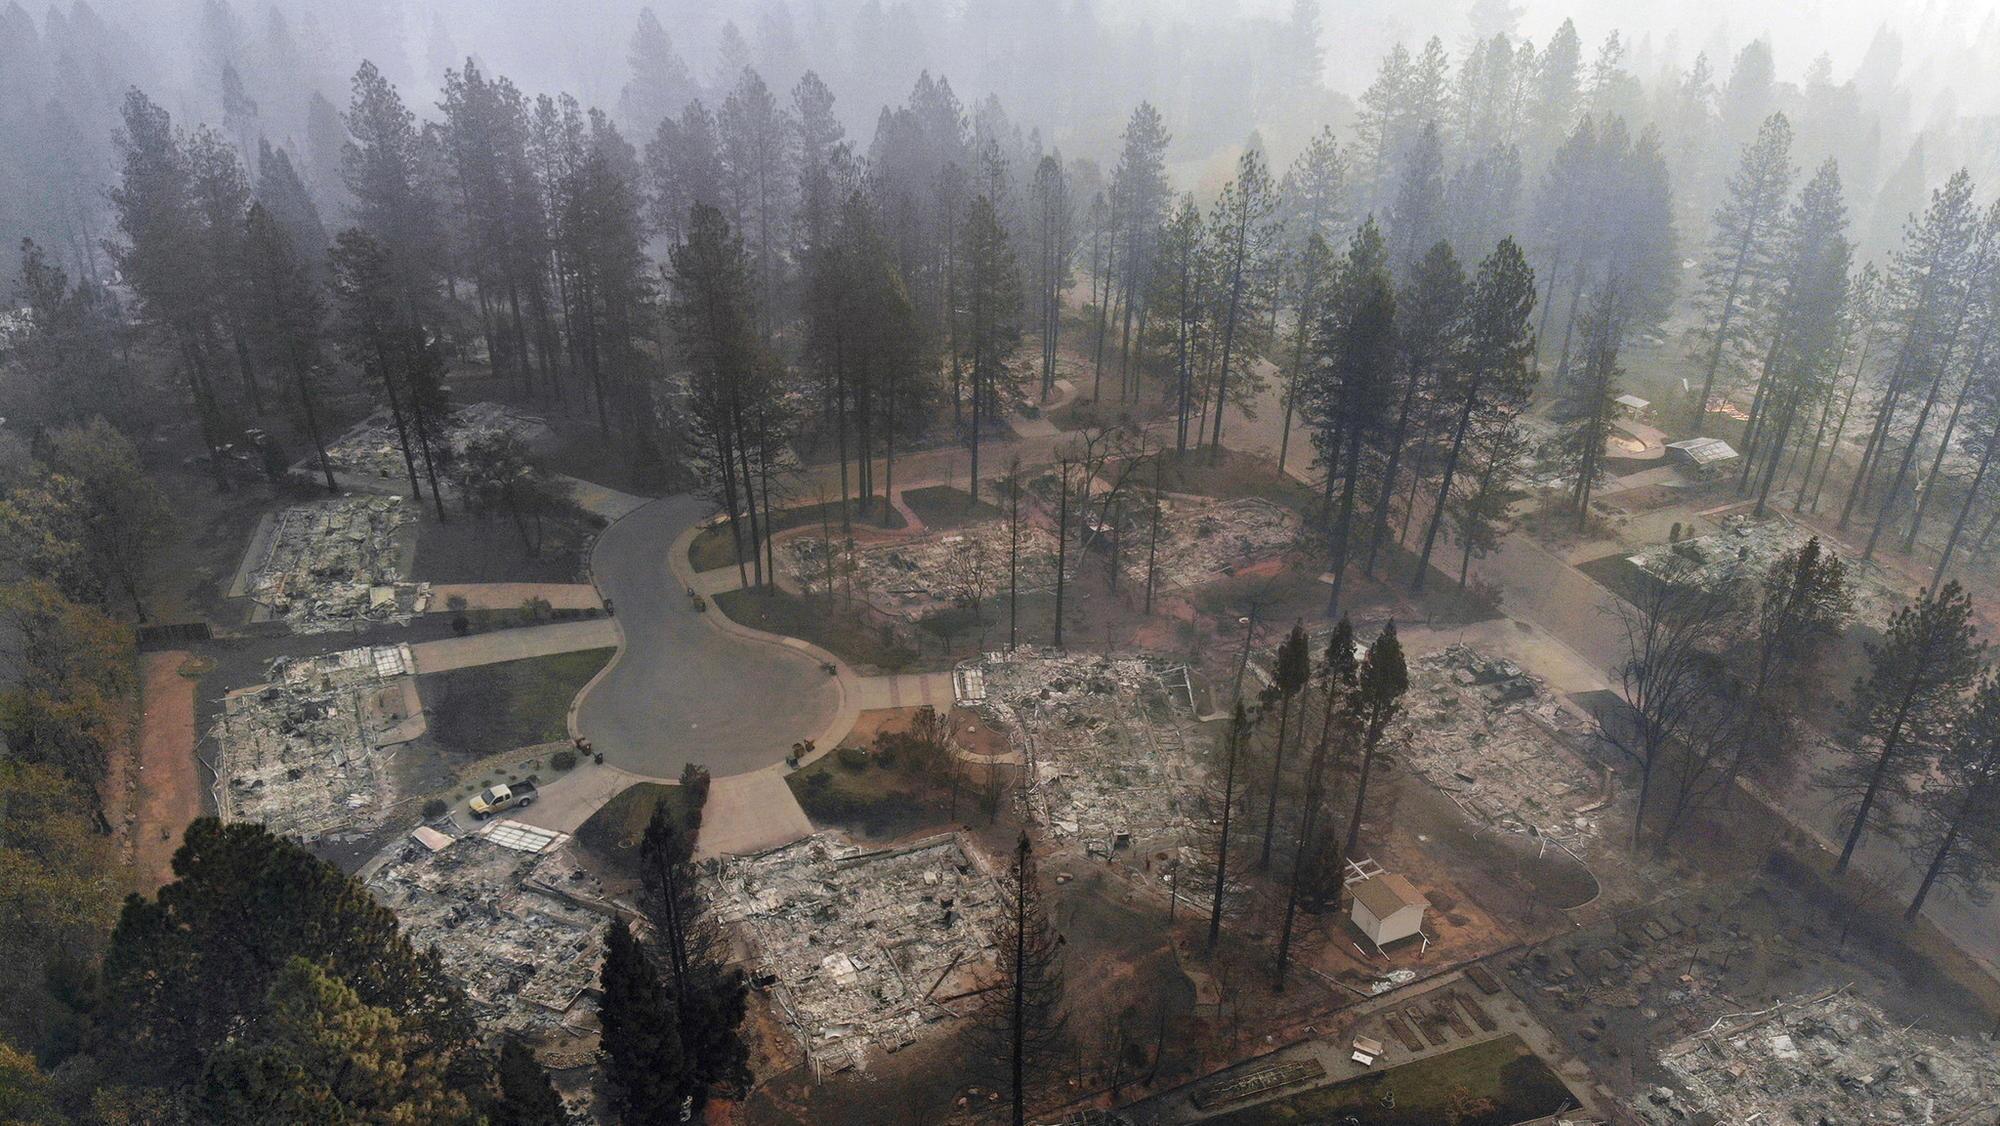 A cul-de-sac of homes burned to their foundations is surrounded by conifers.